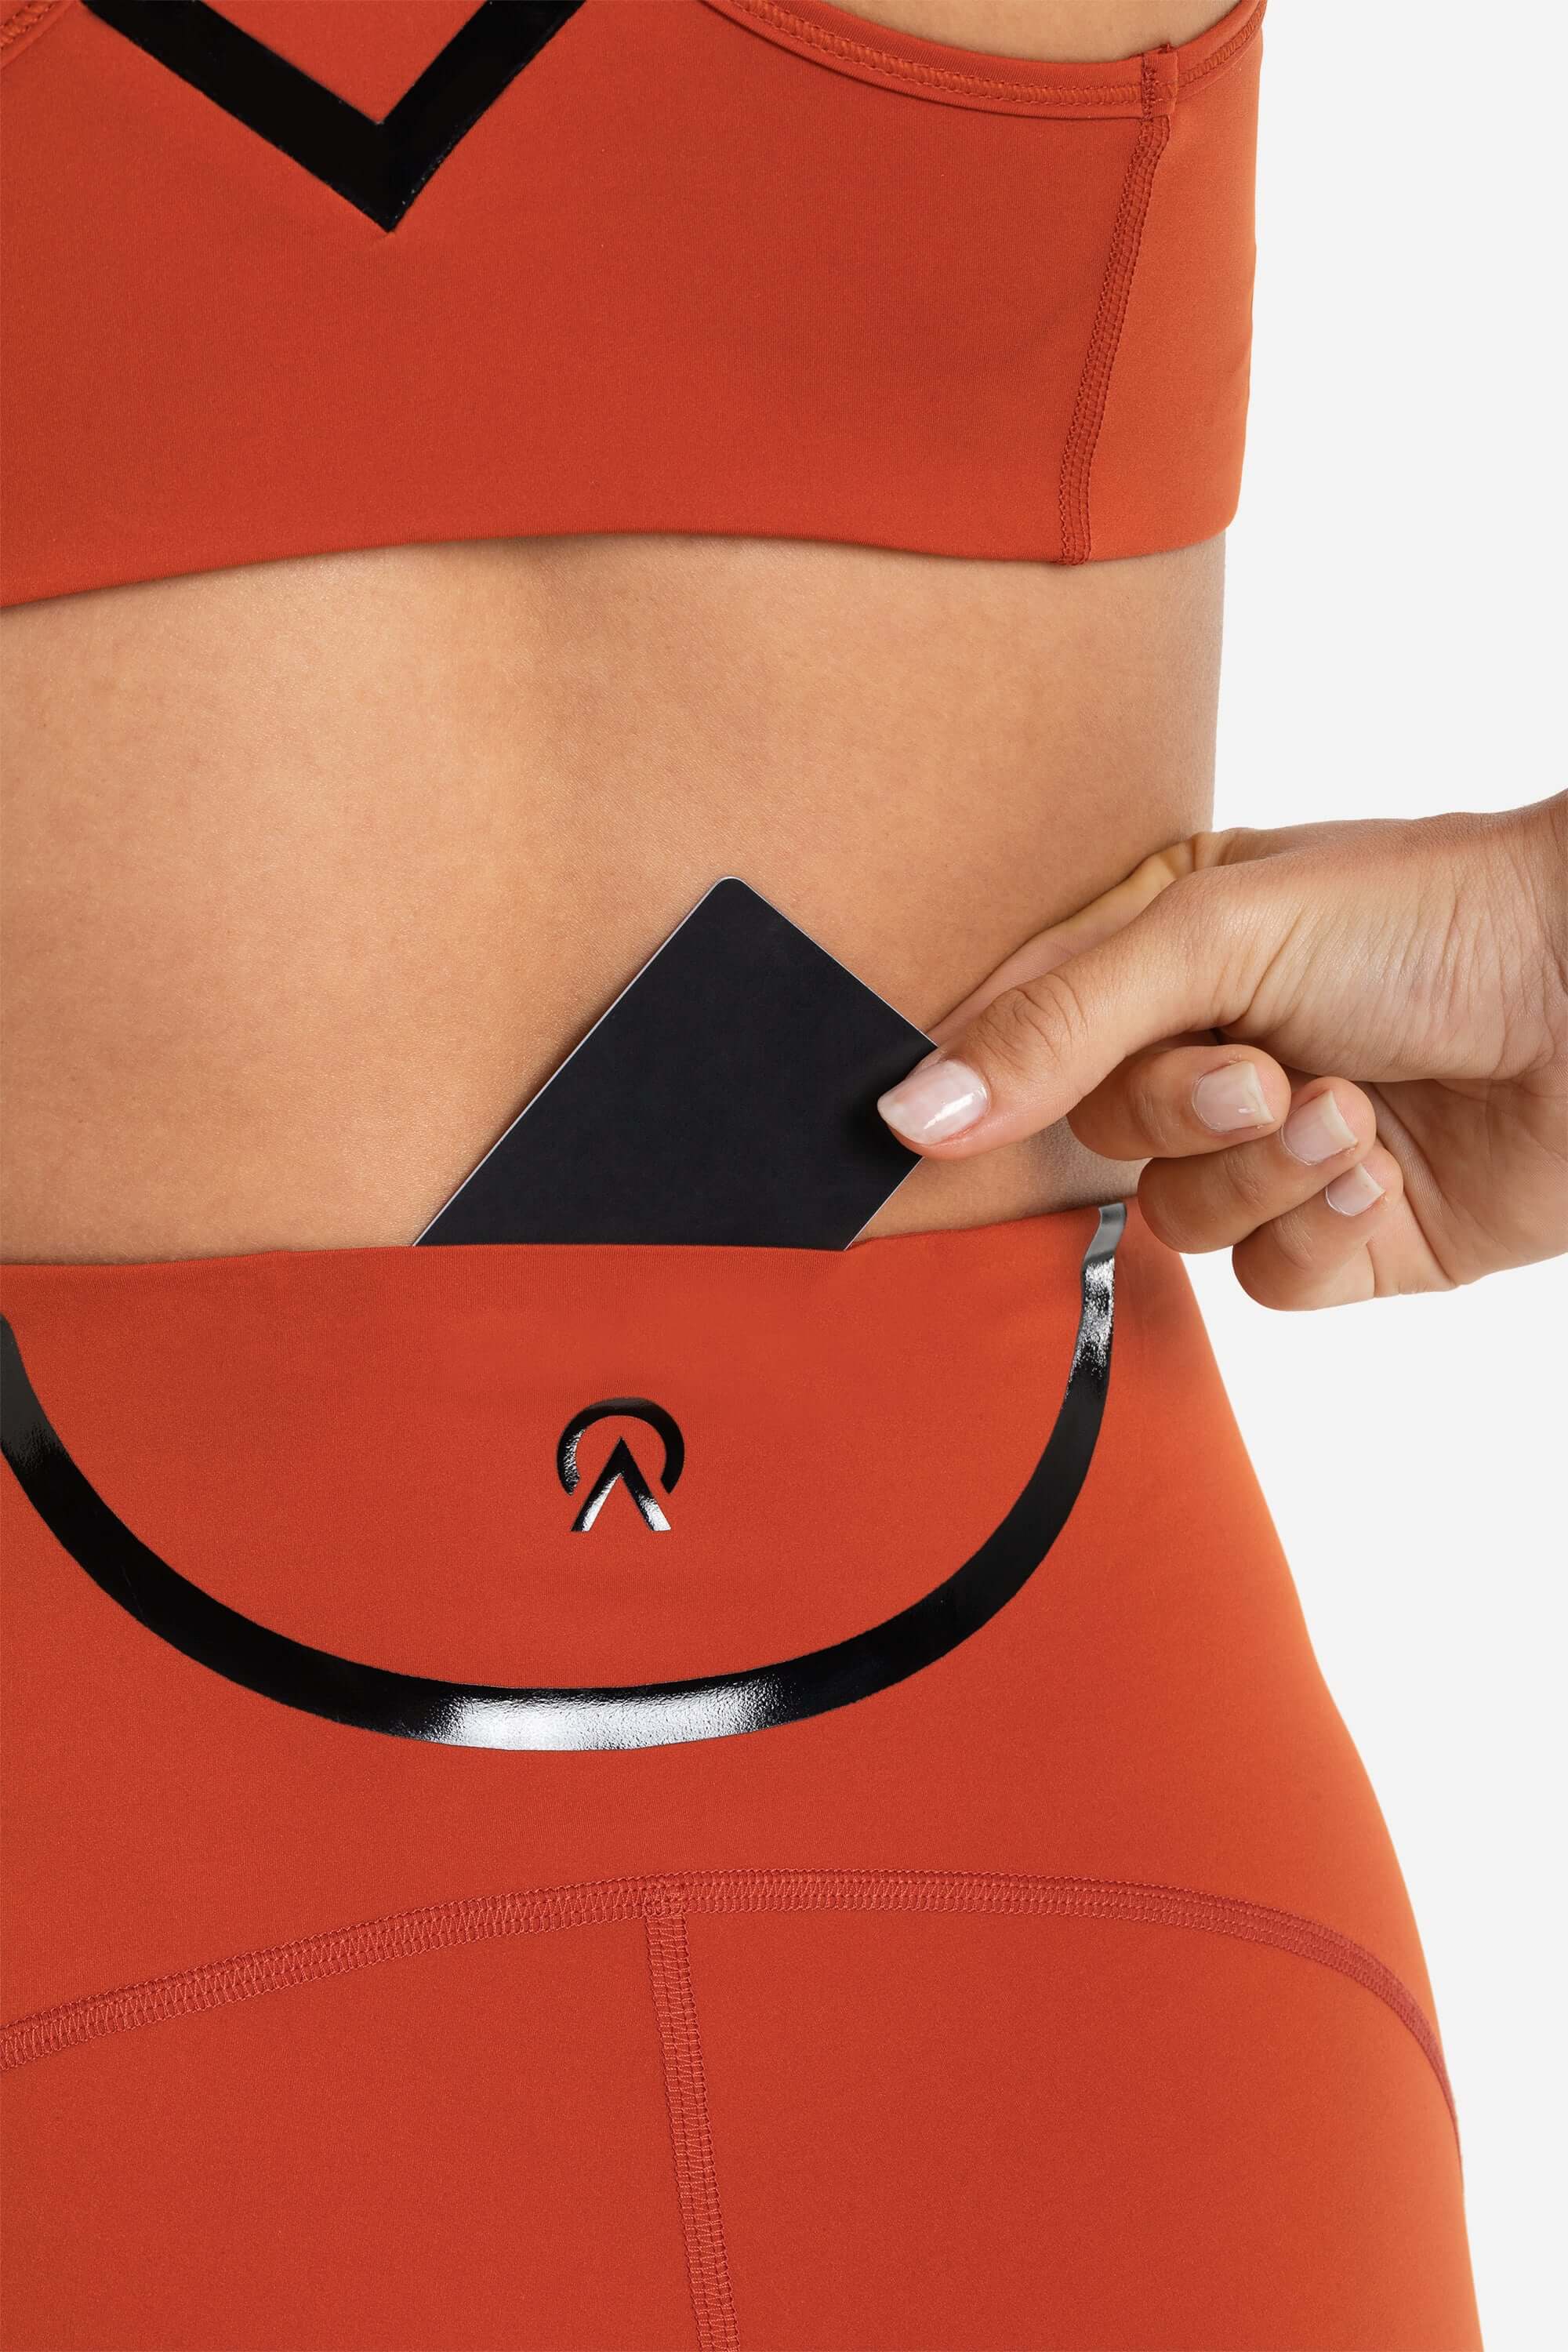 women in sports bra and short tights in red showing the credit card pocket